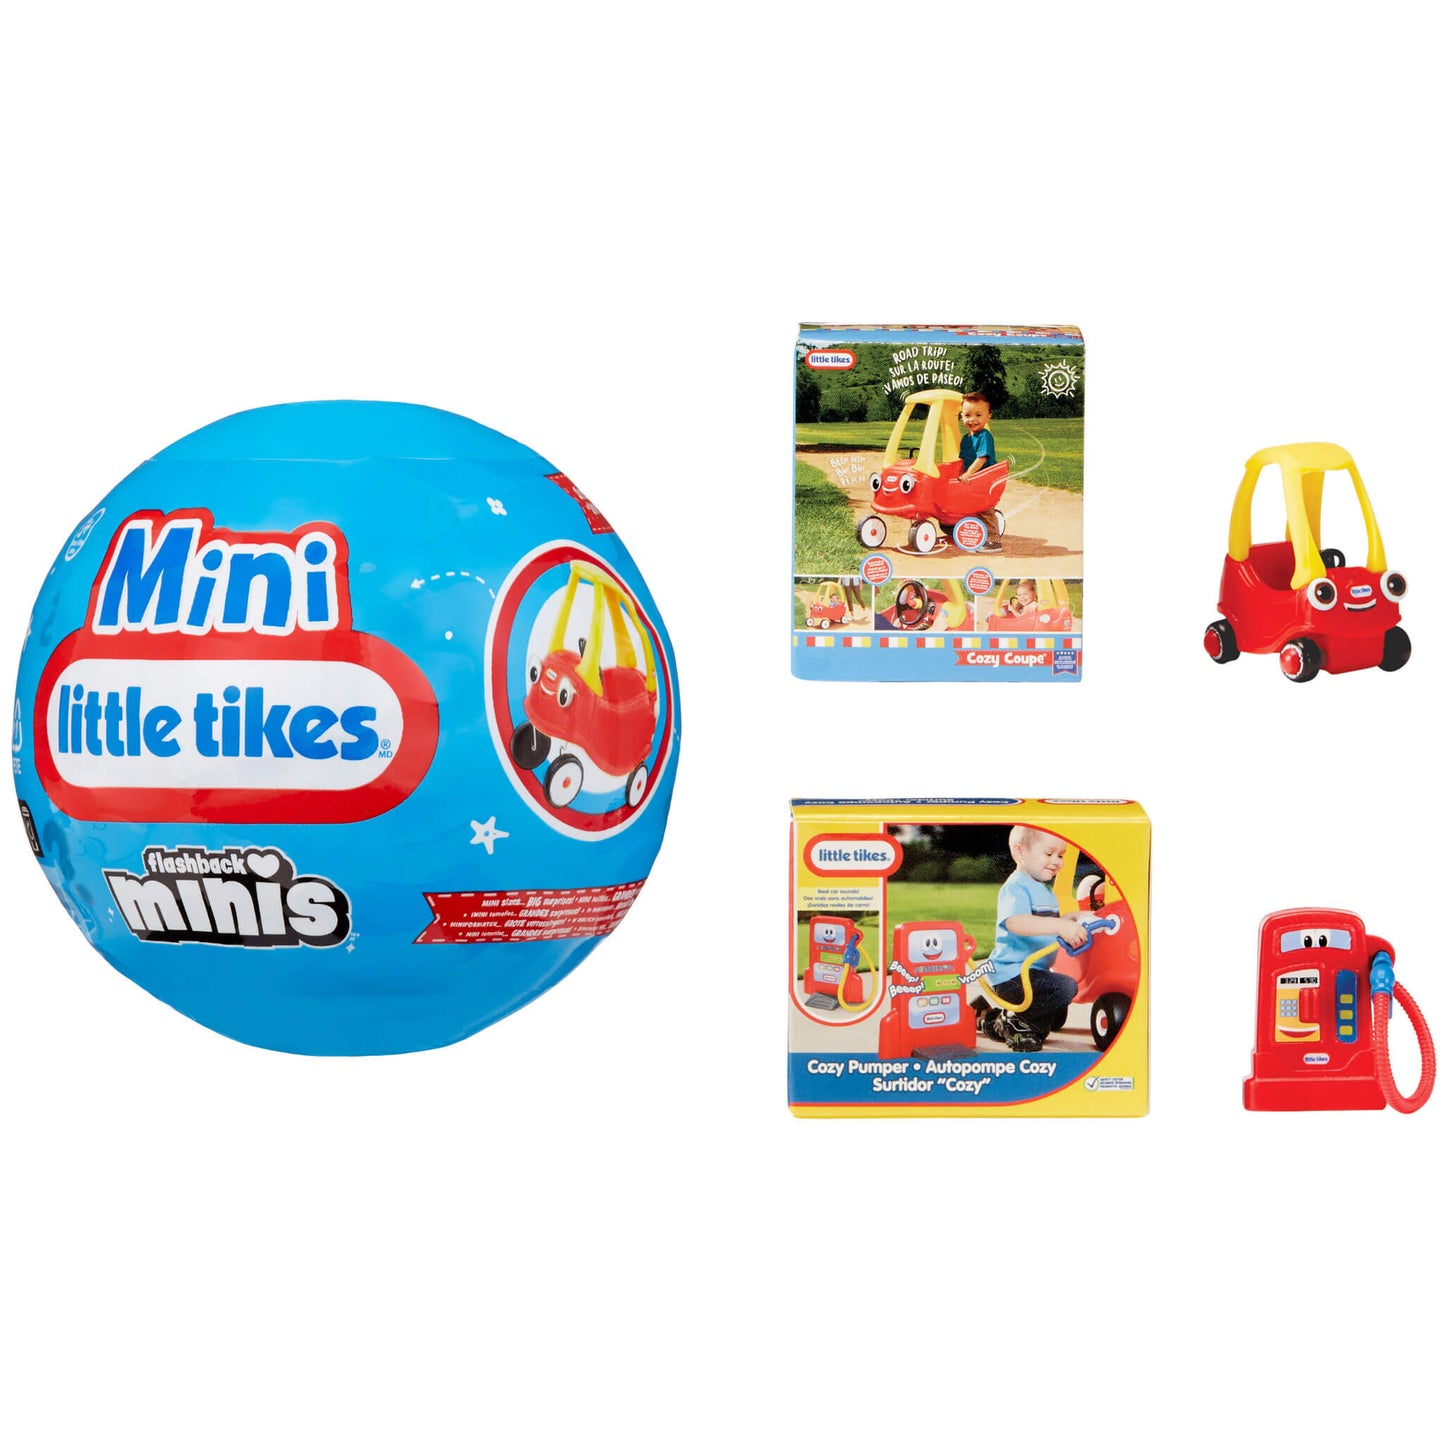 MGA's Miniverse - Little Tikes Minis in PDQ